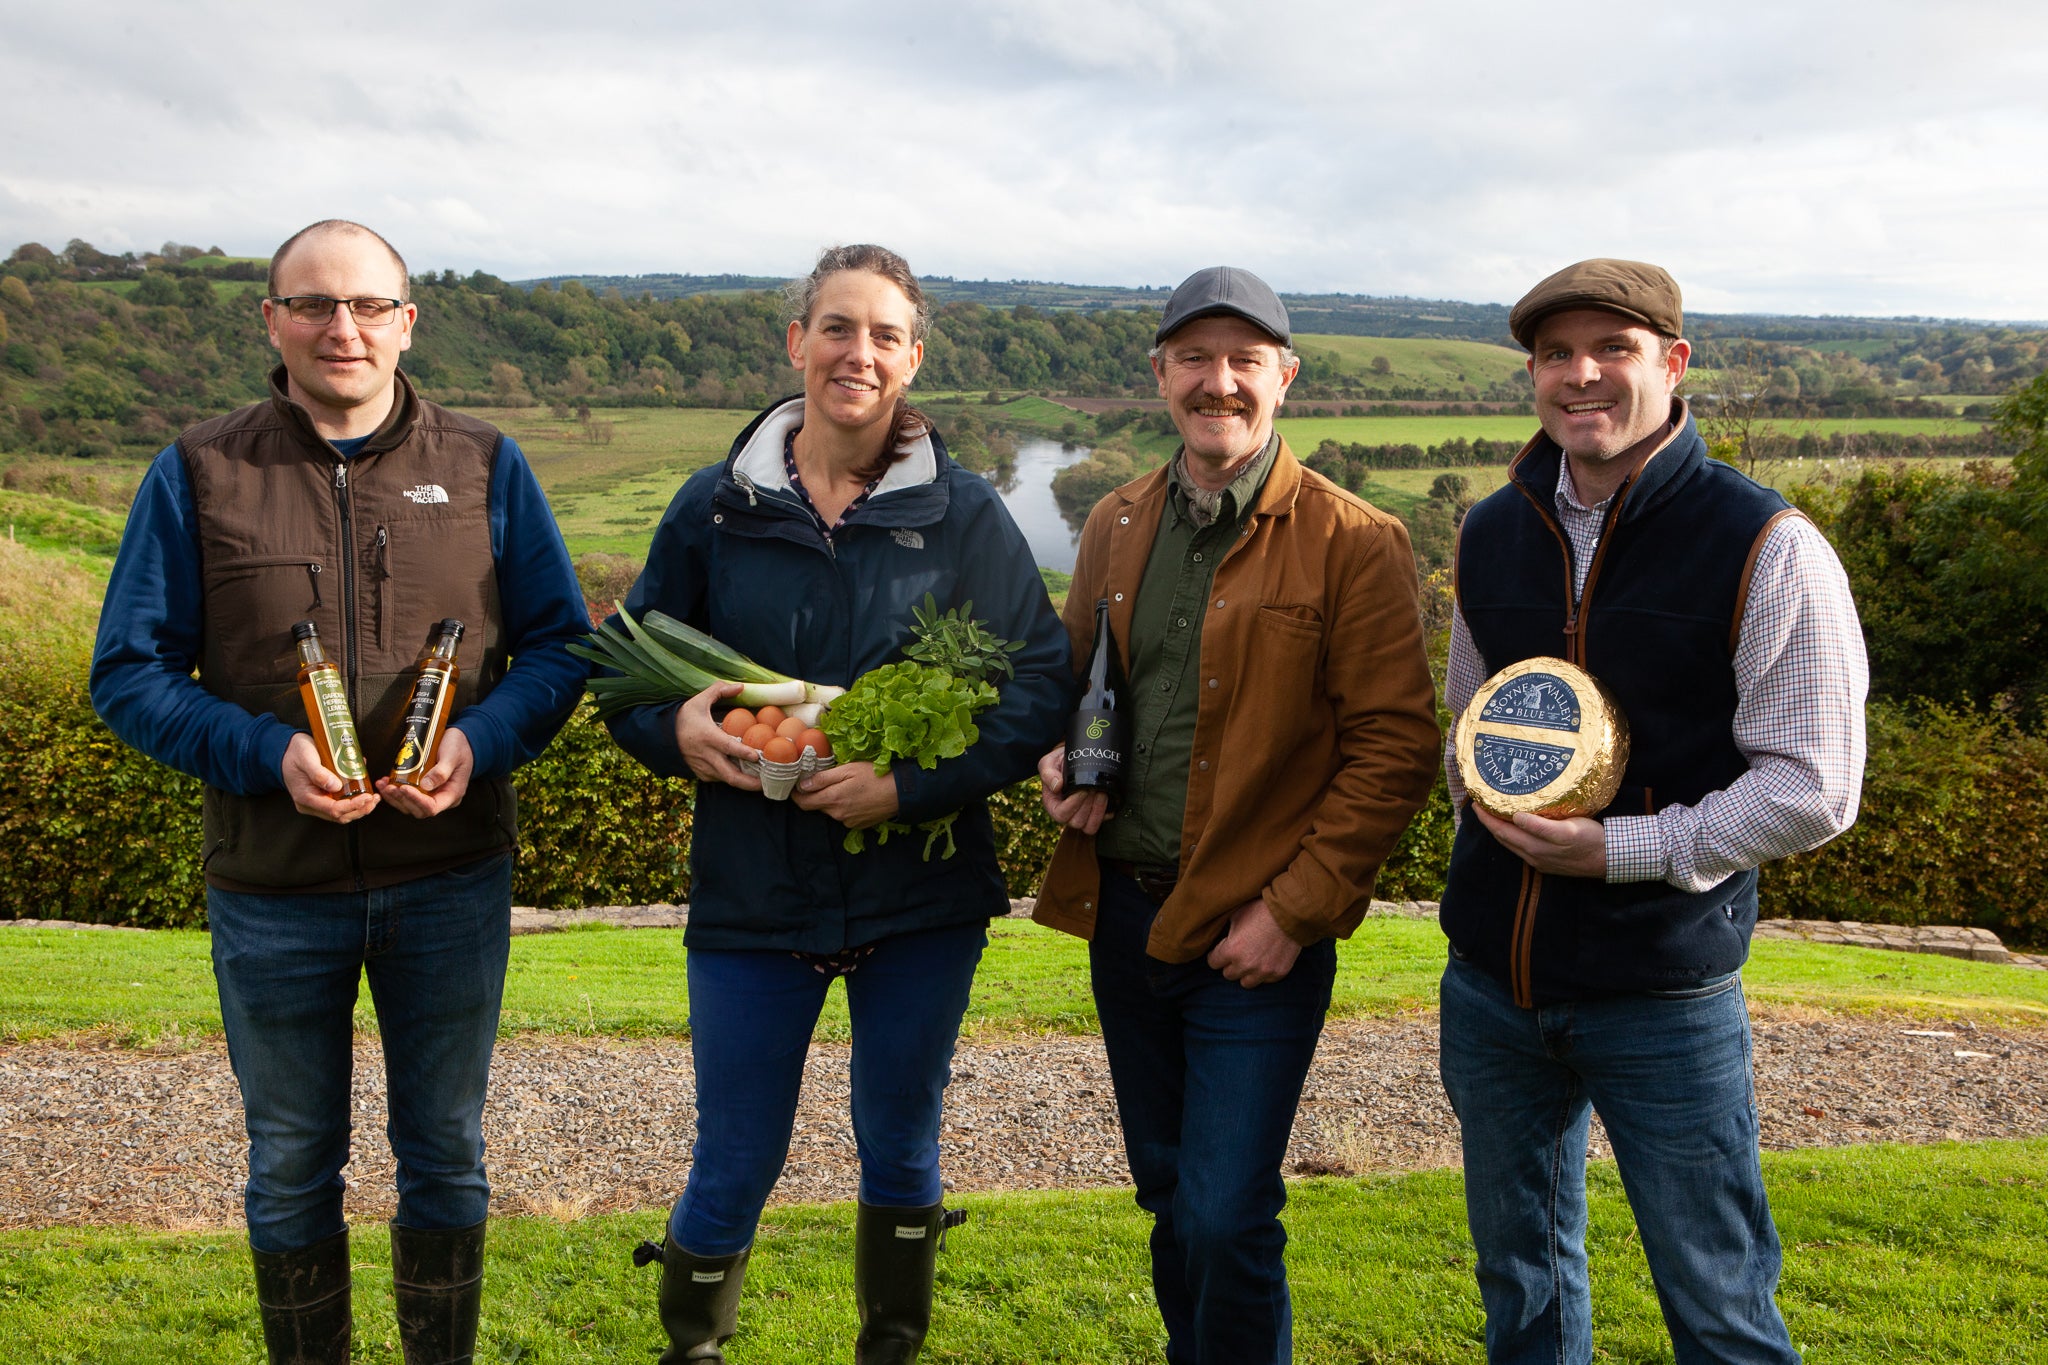 Visitors can try cheese, oils and cider on a Slane Food Circle tour